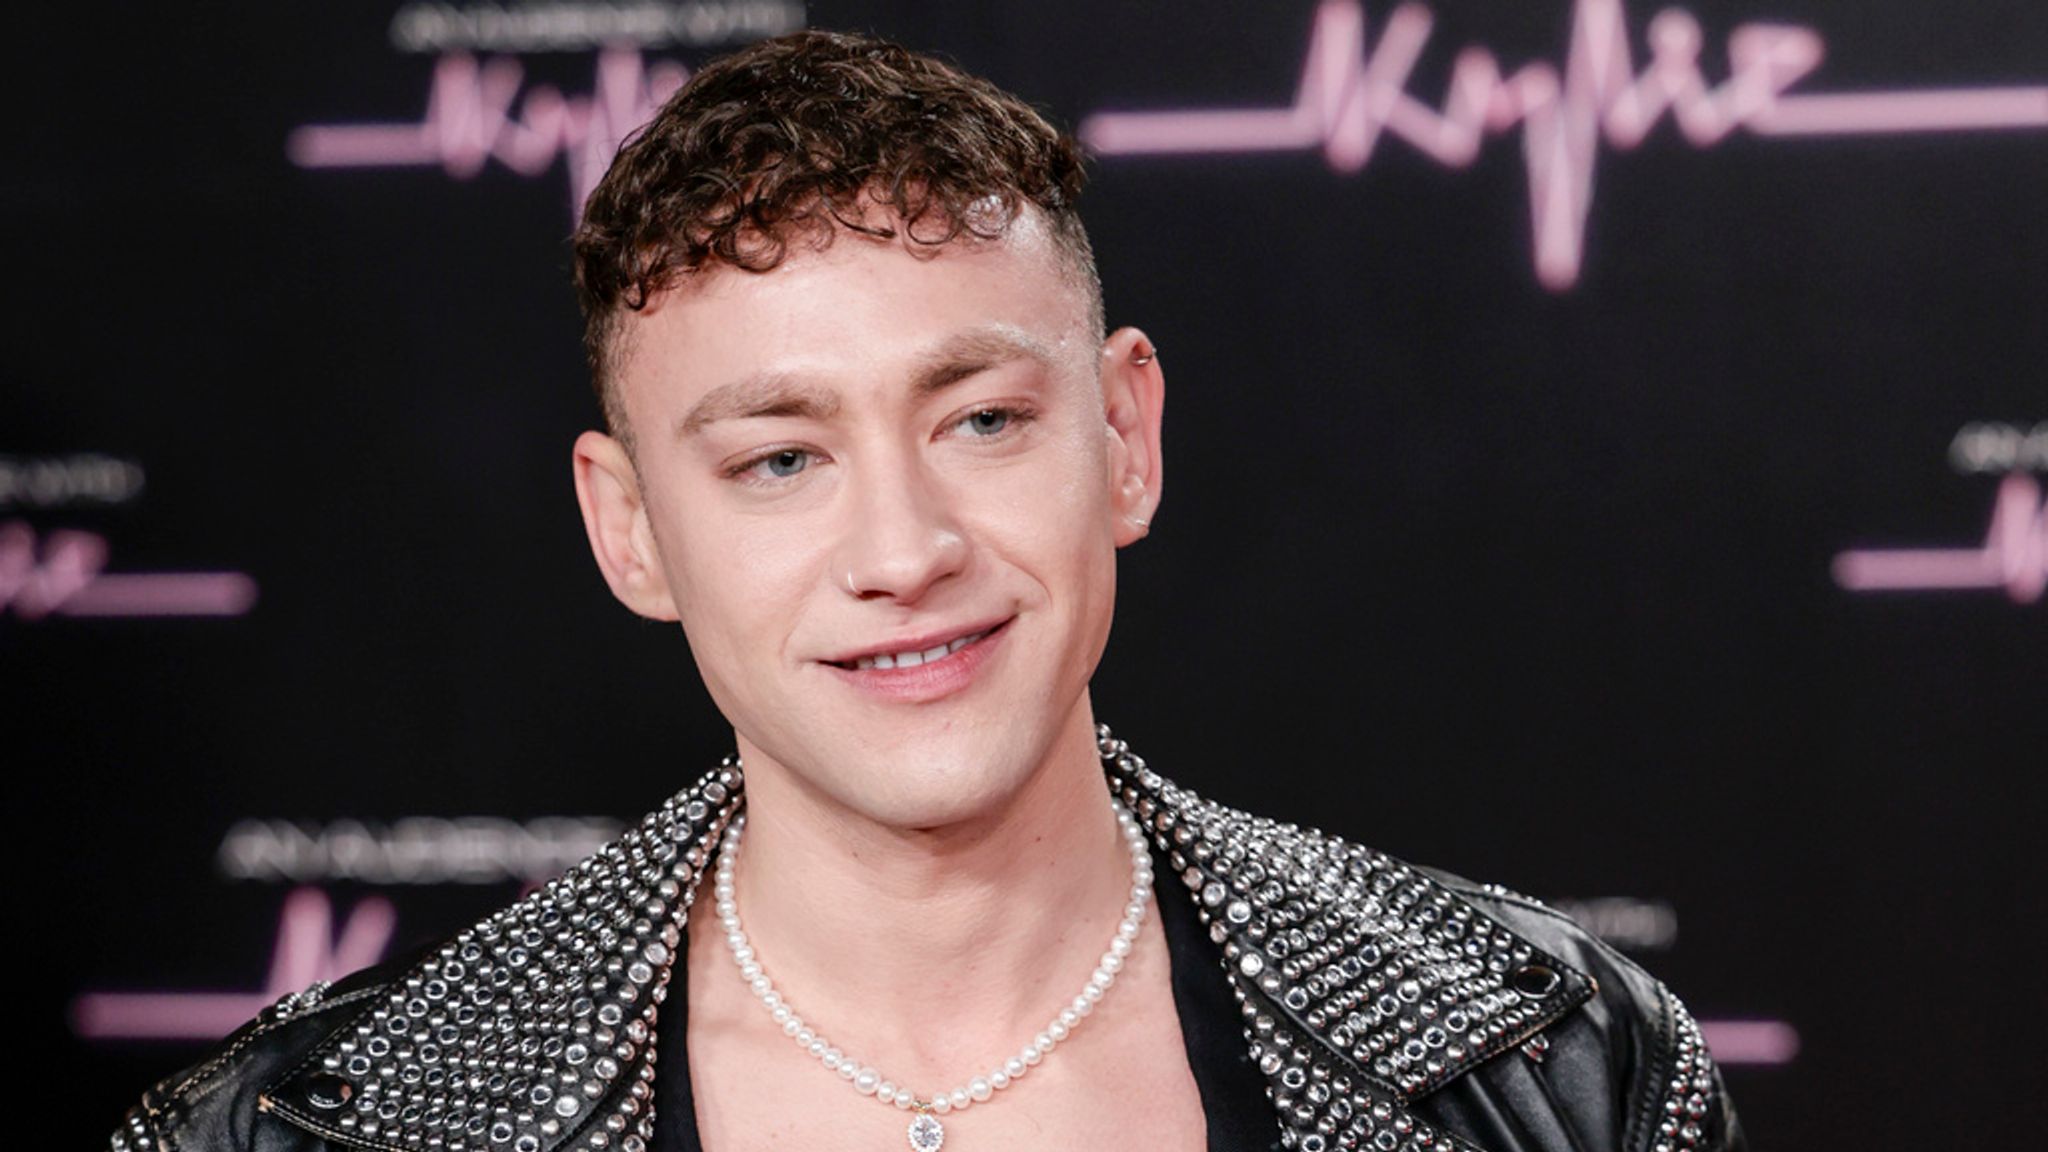 Olly Alexander from Years & Years joins Eurovision!